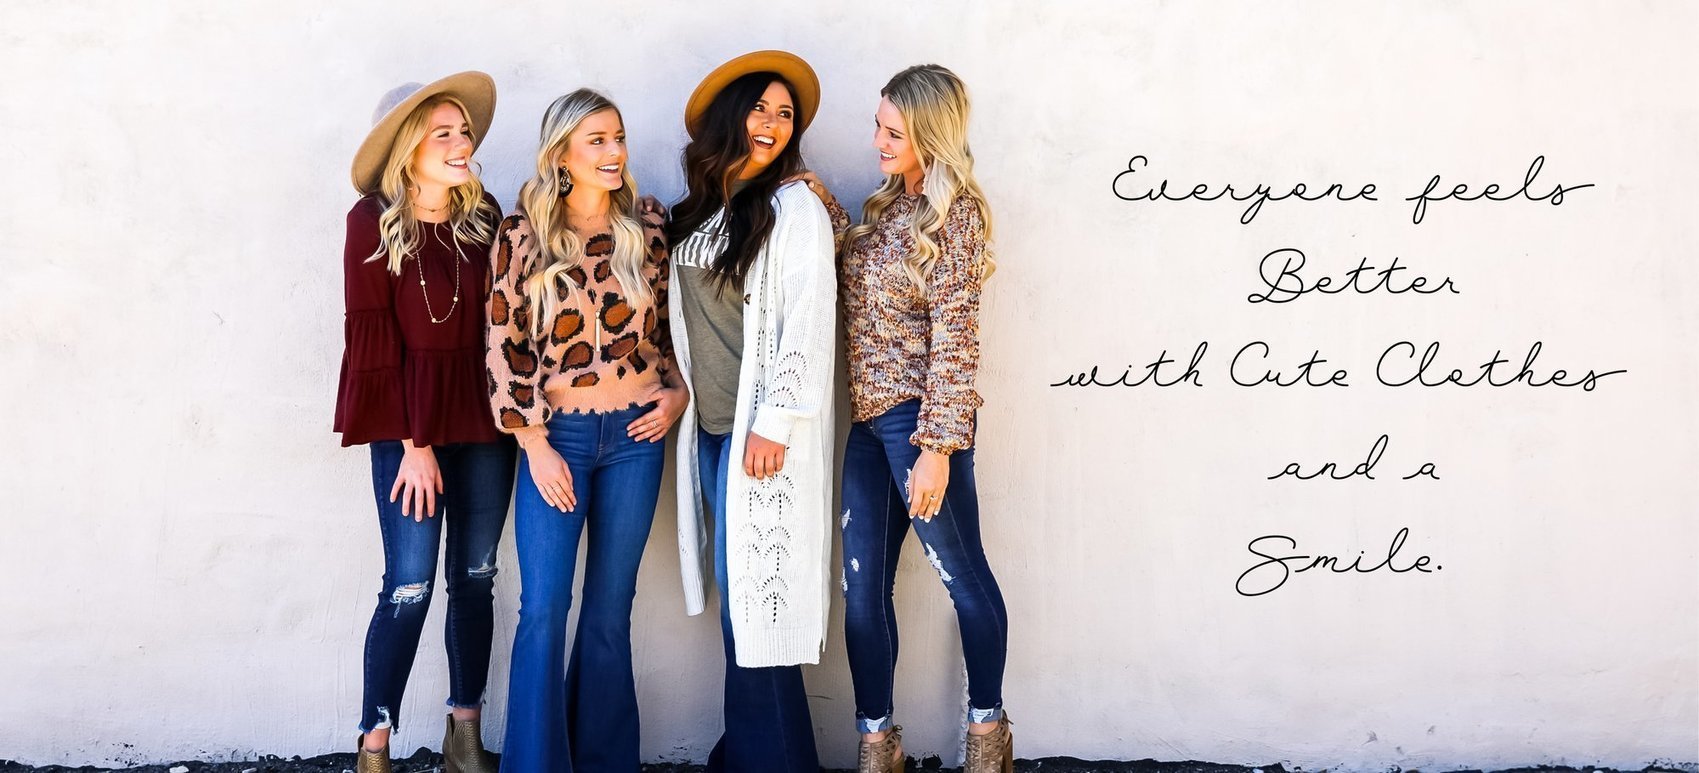 southern women's clothing online